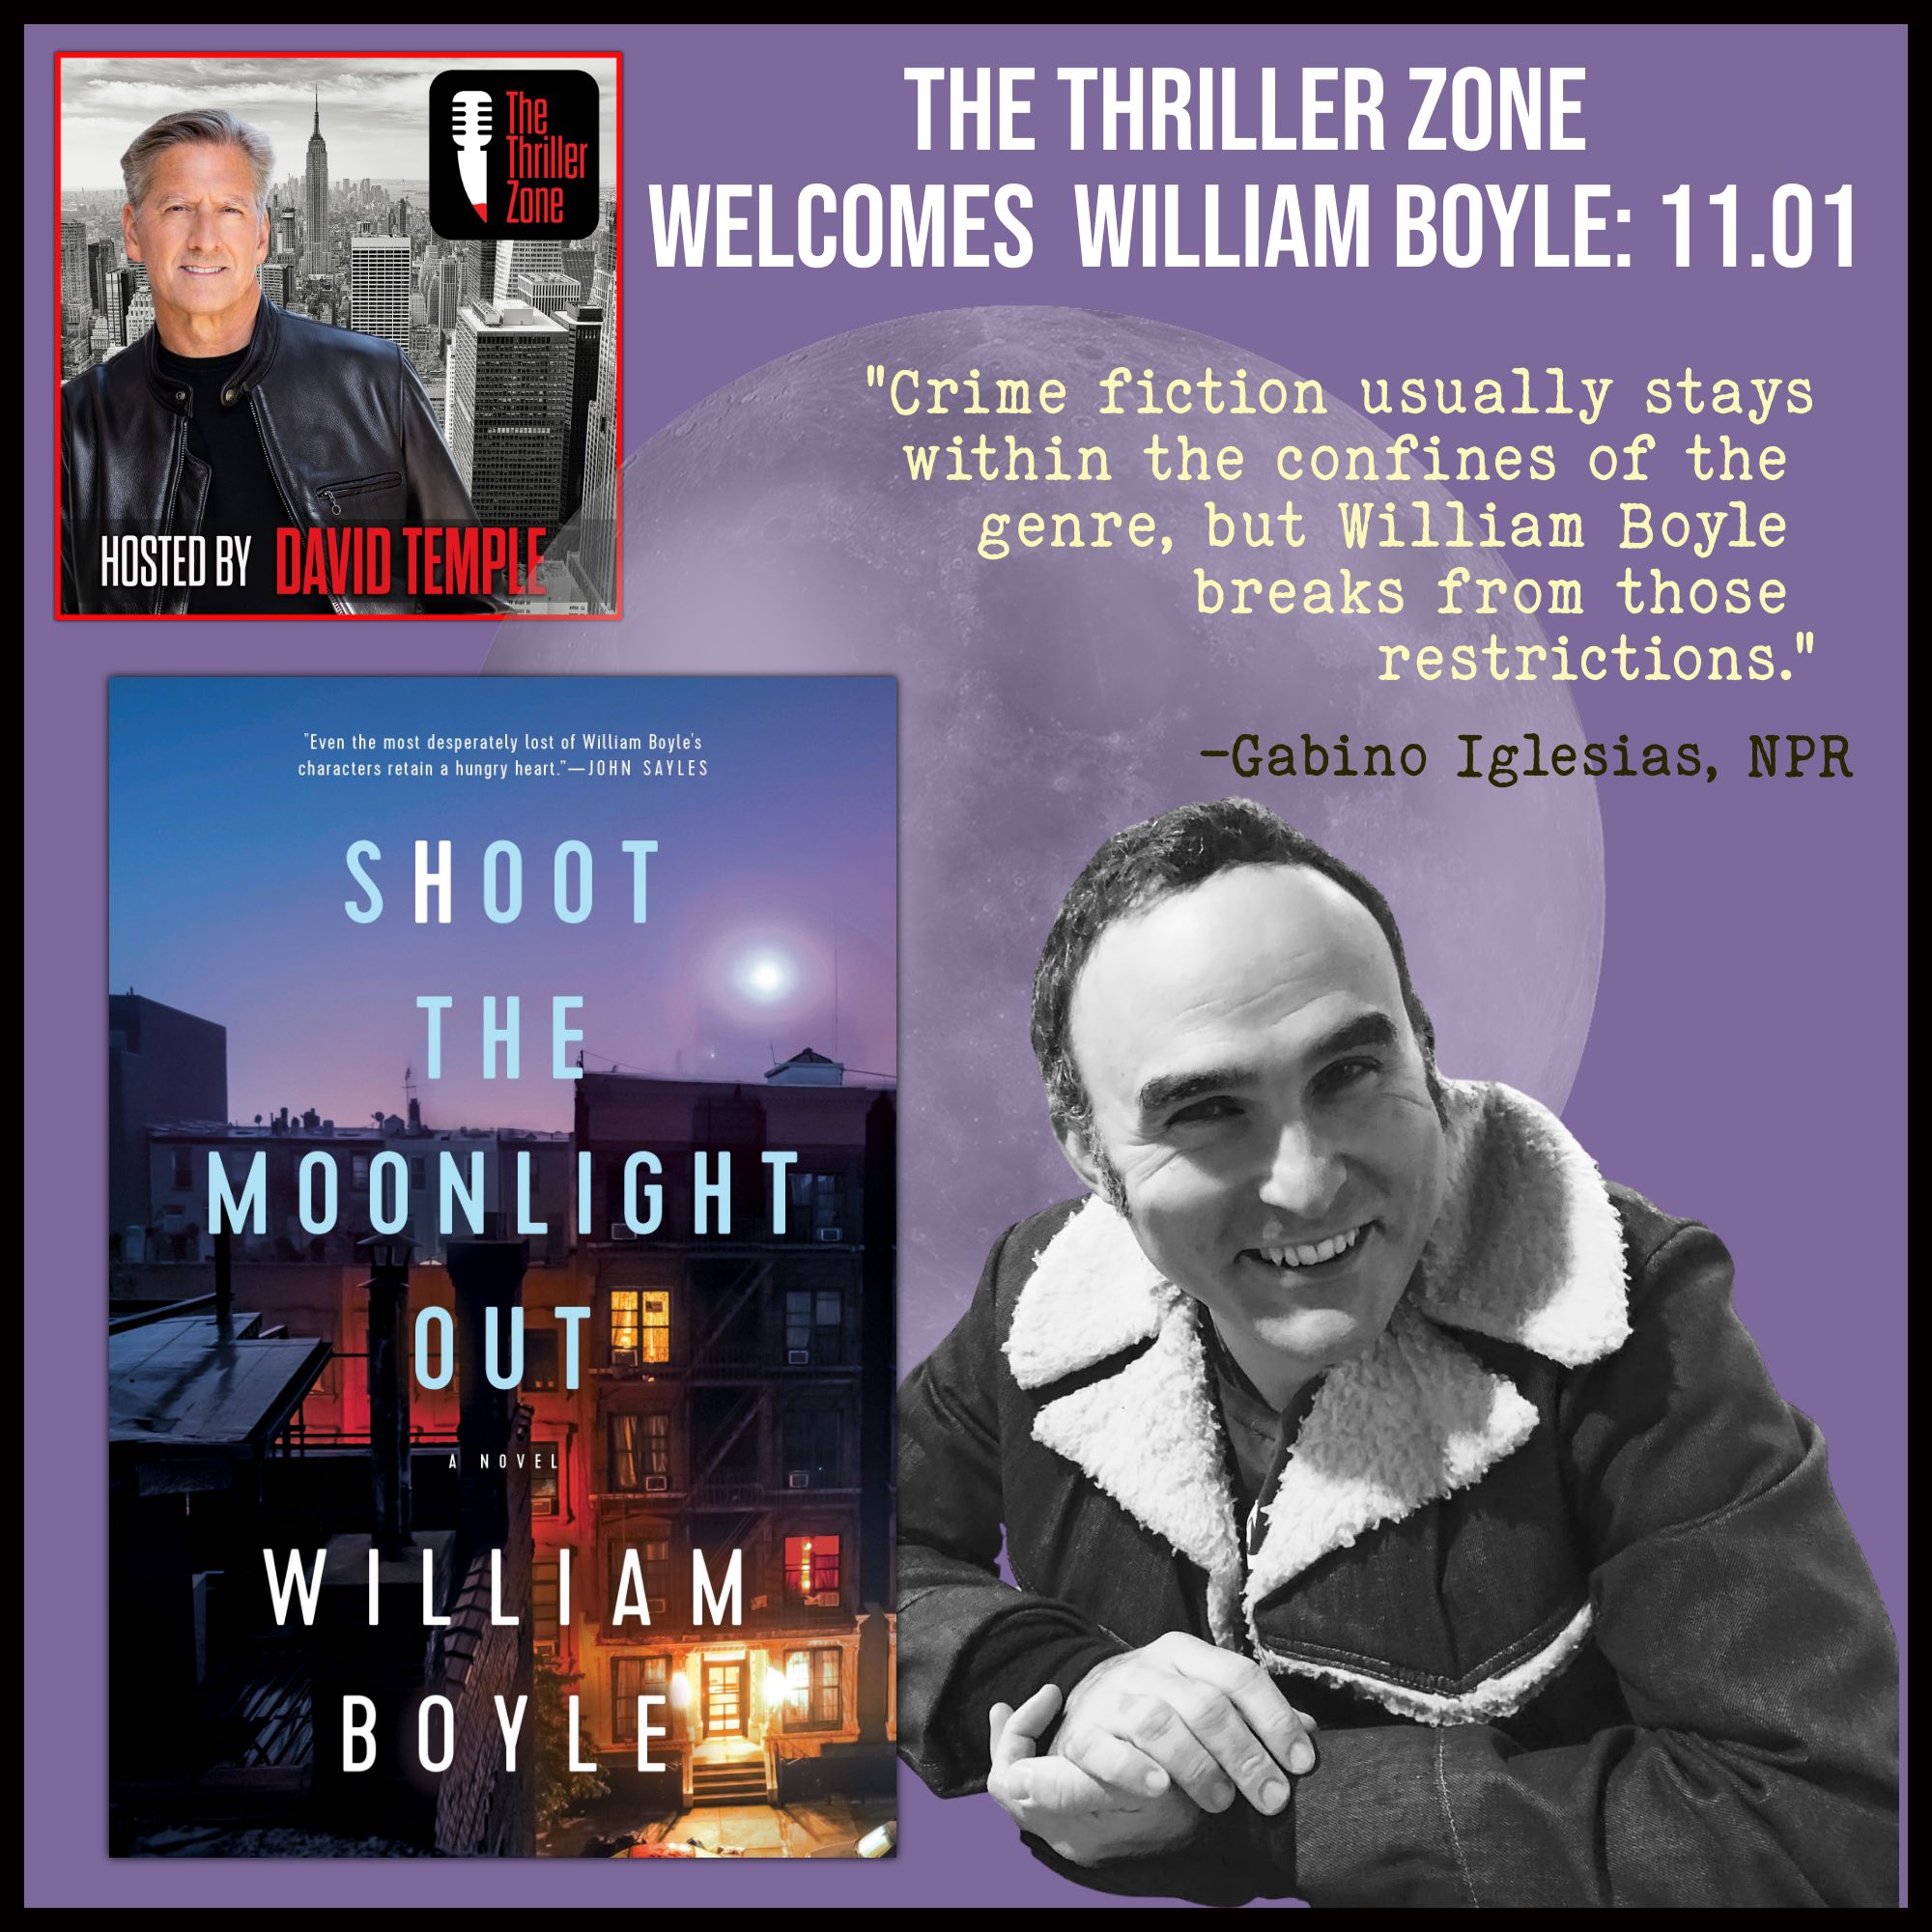 William Boyle, crime writer of Shoot The Moonlight Out Image